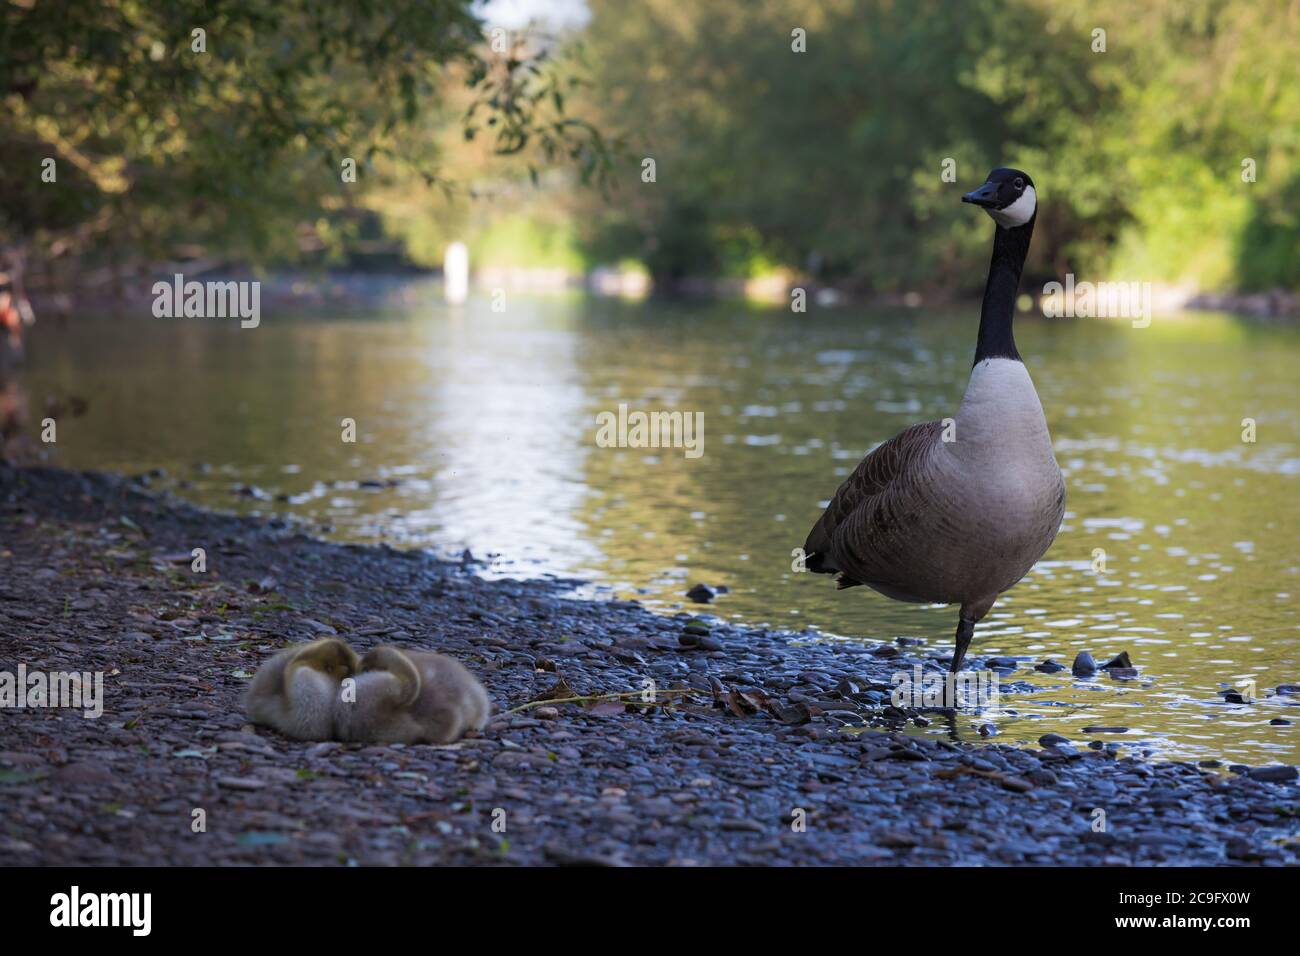 Mother canada goose watching over sleeping chicks on the bank of river Wupper in Opladen. Stock Photo